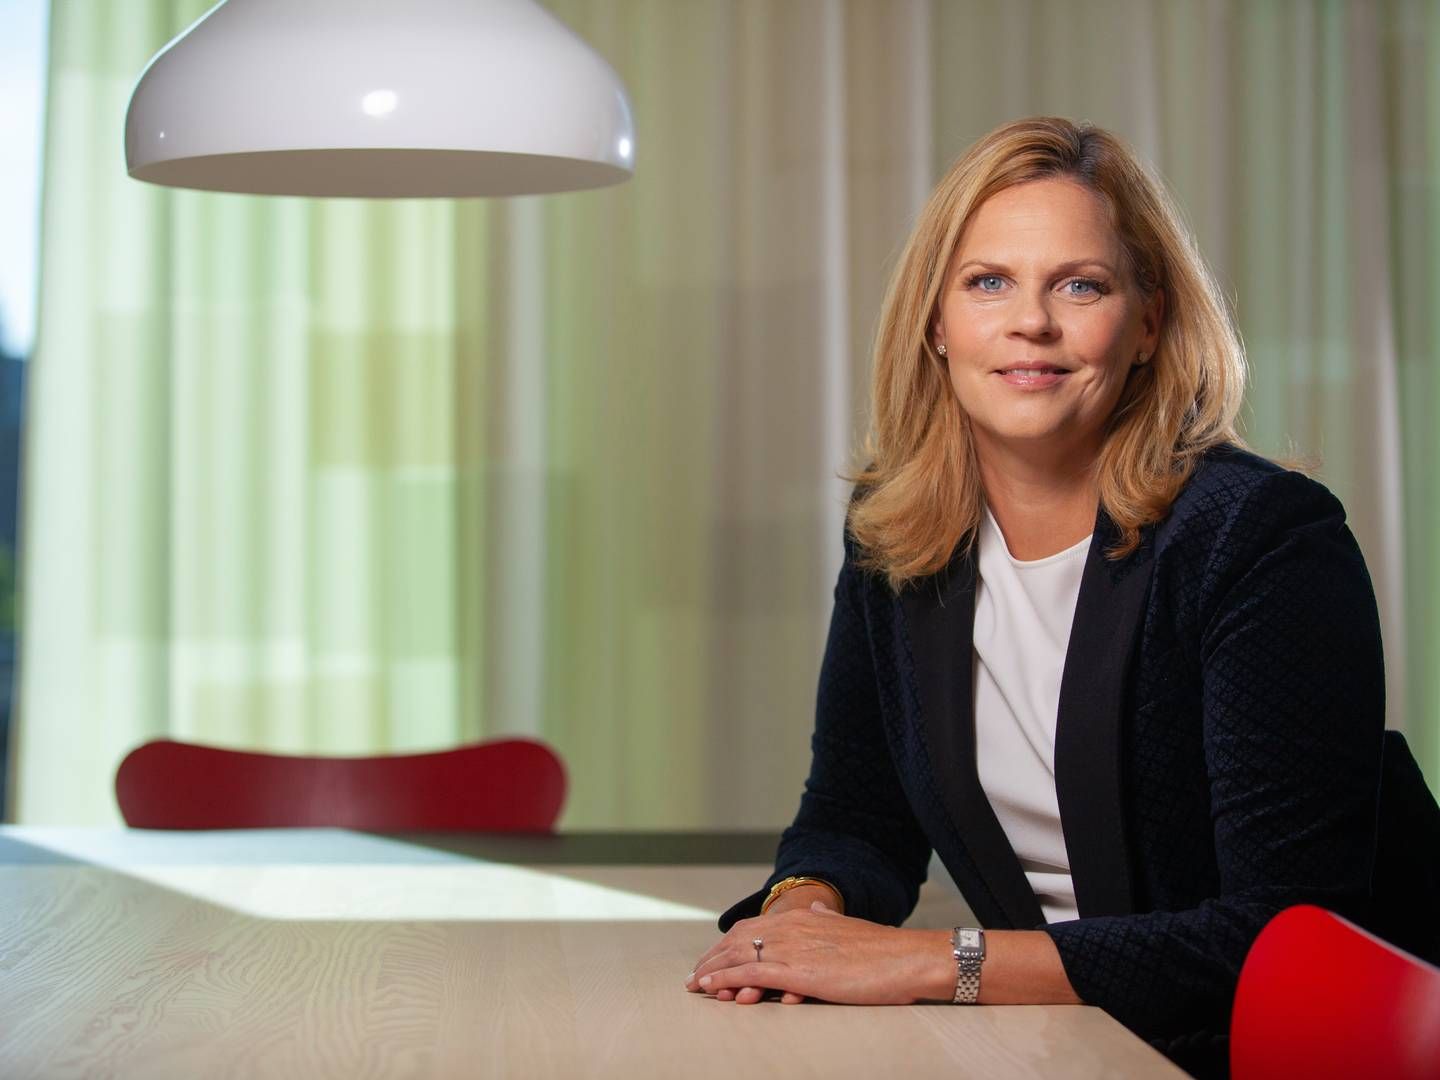 Mia Nyberg has been appointed CEO of the Swedish fund manager Storebrand Fonder. | Photo: Storebrand Fonder / Pr